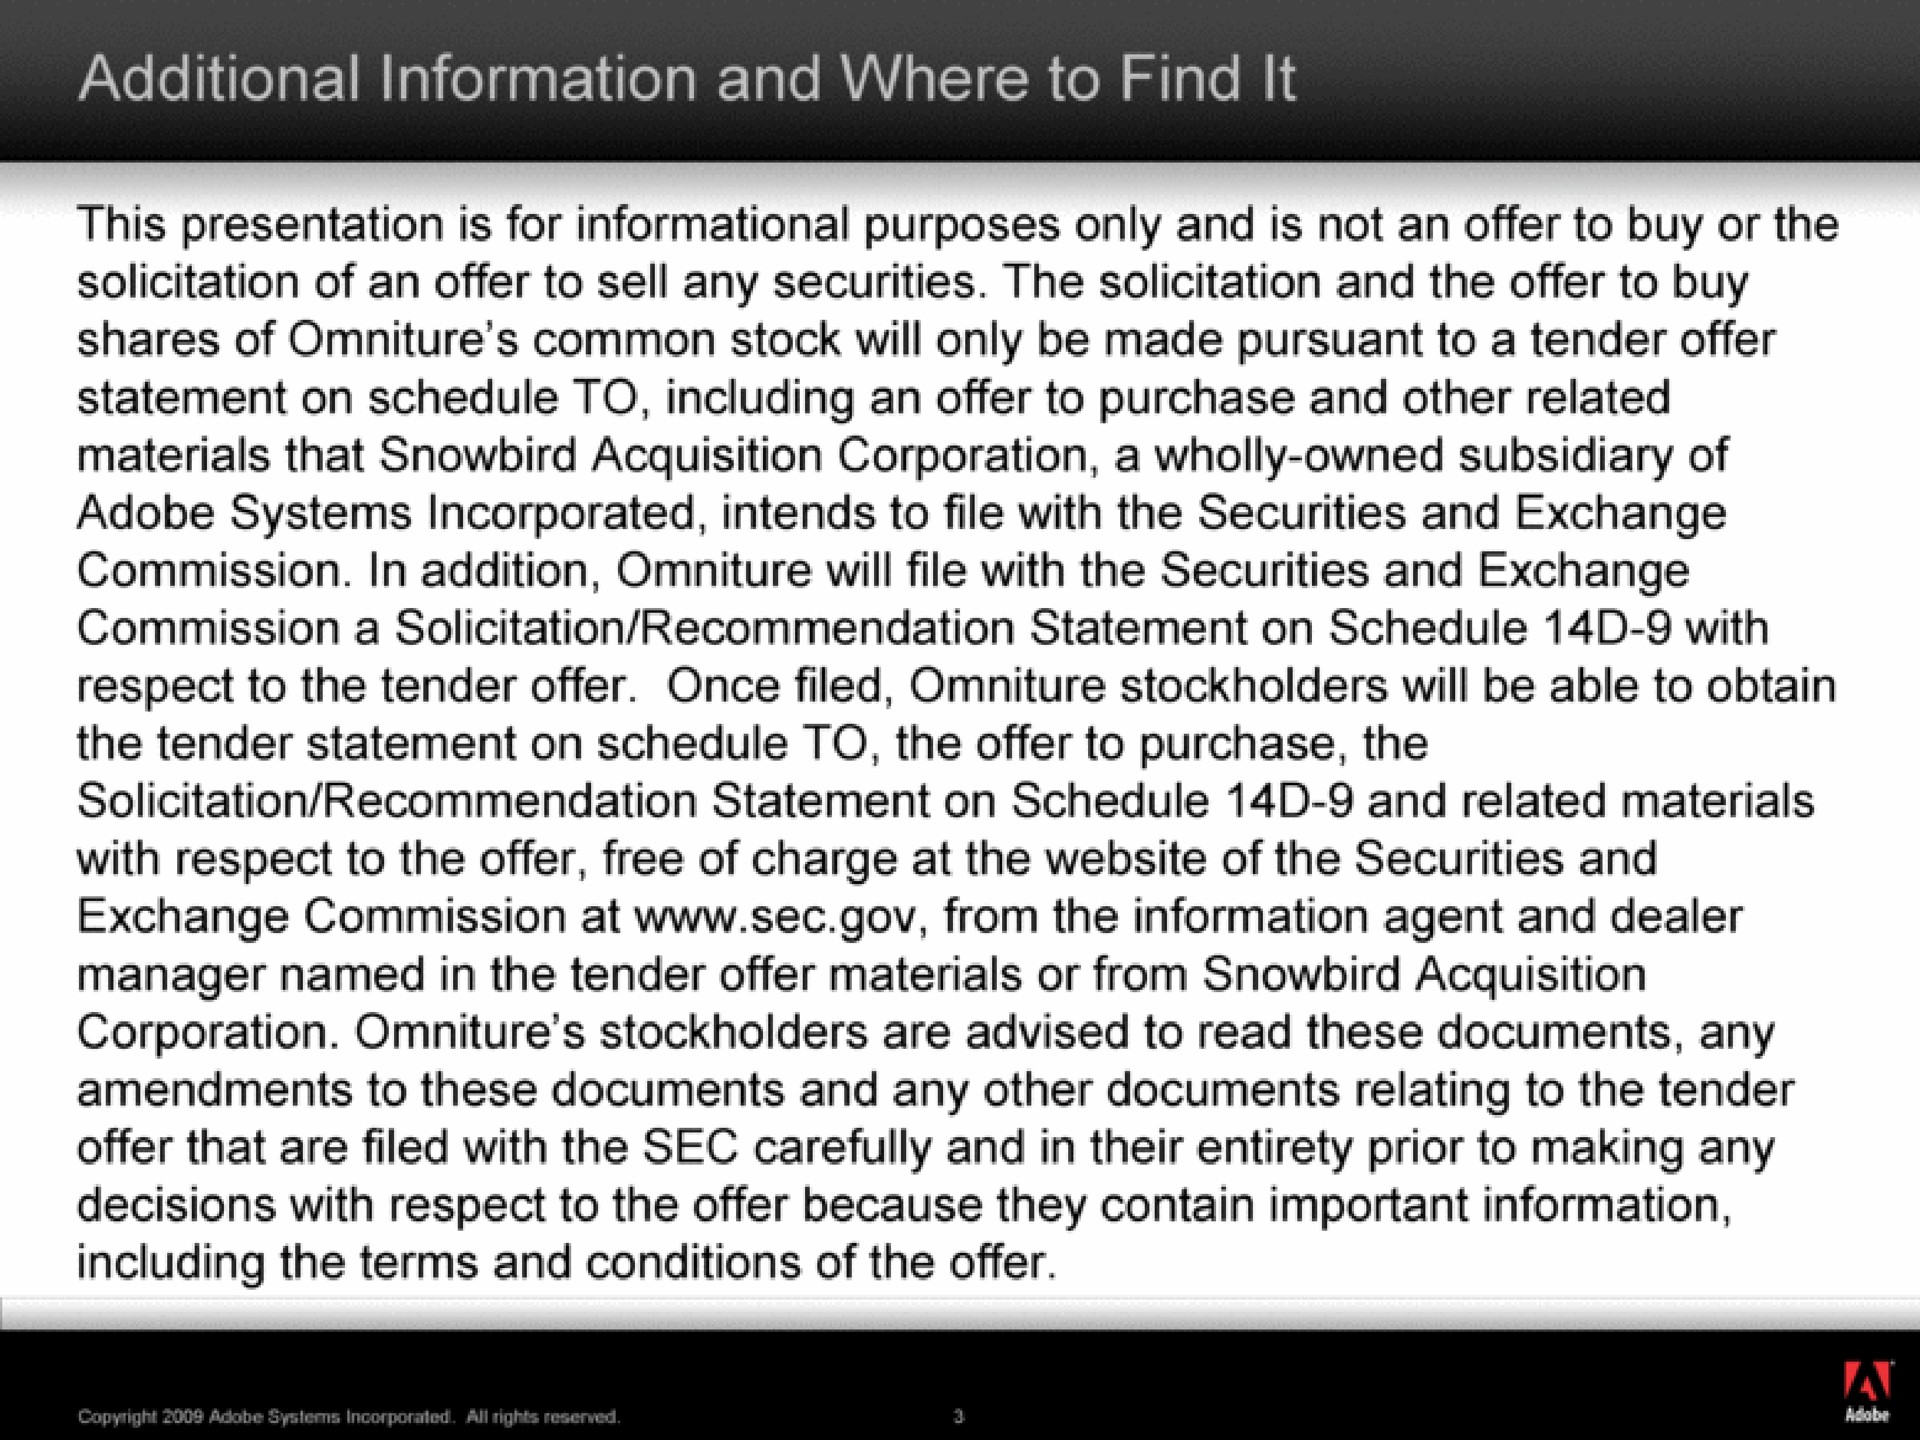 additional information and where to find it this presentation is for informational purposes only and is not an offer to buy or the materials that snowbird acquisition corporation a wholly owned subsidiary of adobe systems incorporated intends to file with the securities and exchange commission a solicitation recommendation statement on schedule with solicitation recommendation statement on schedule and related materials exchange commission at sec from the information agent and dealer manager named in the tender offer materials or from snowbird acquisition offer that are filed with the sec carefully and in their entirety prior to making any decisions with respect to the offer because they contain important information including the terms and conditions of the offer | Adobe